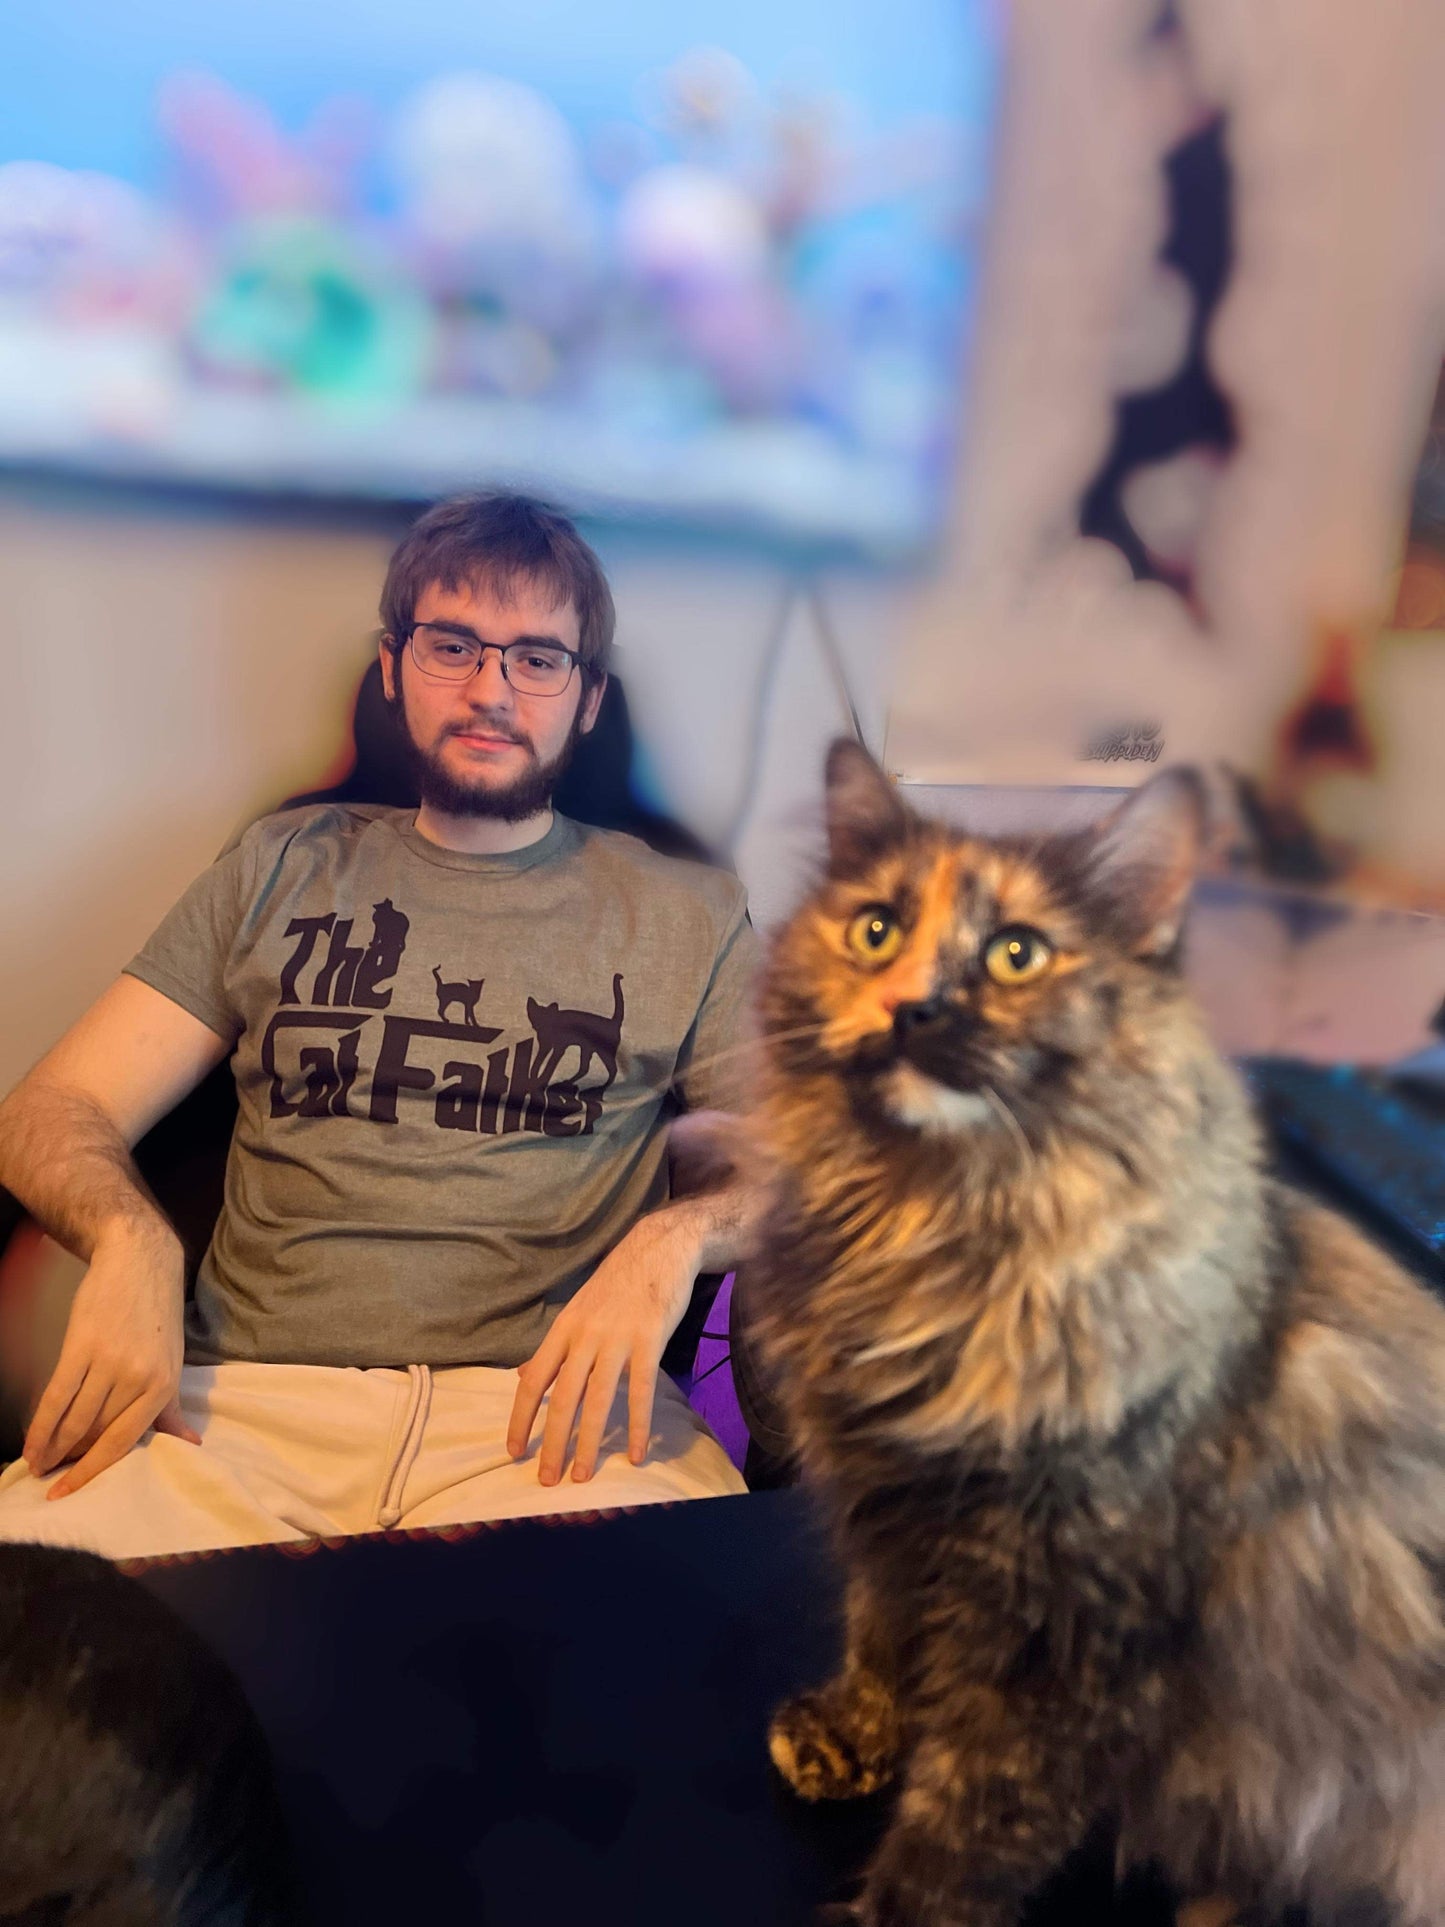 The cat father